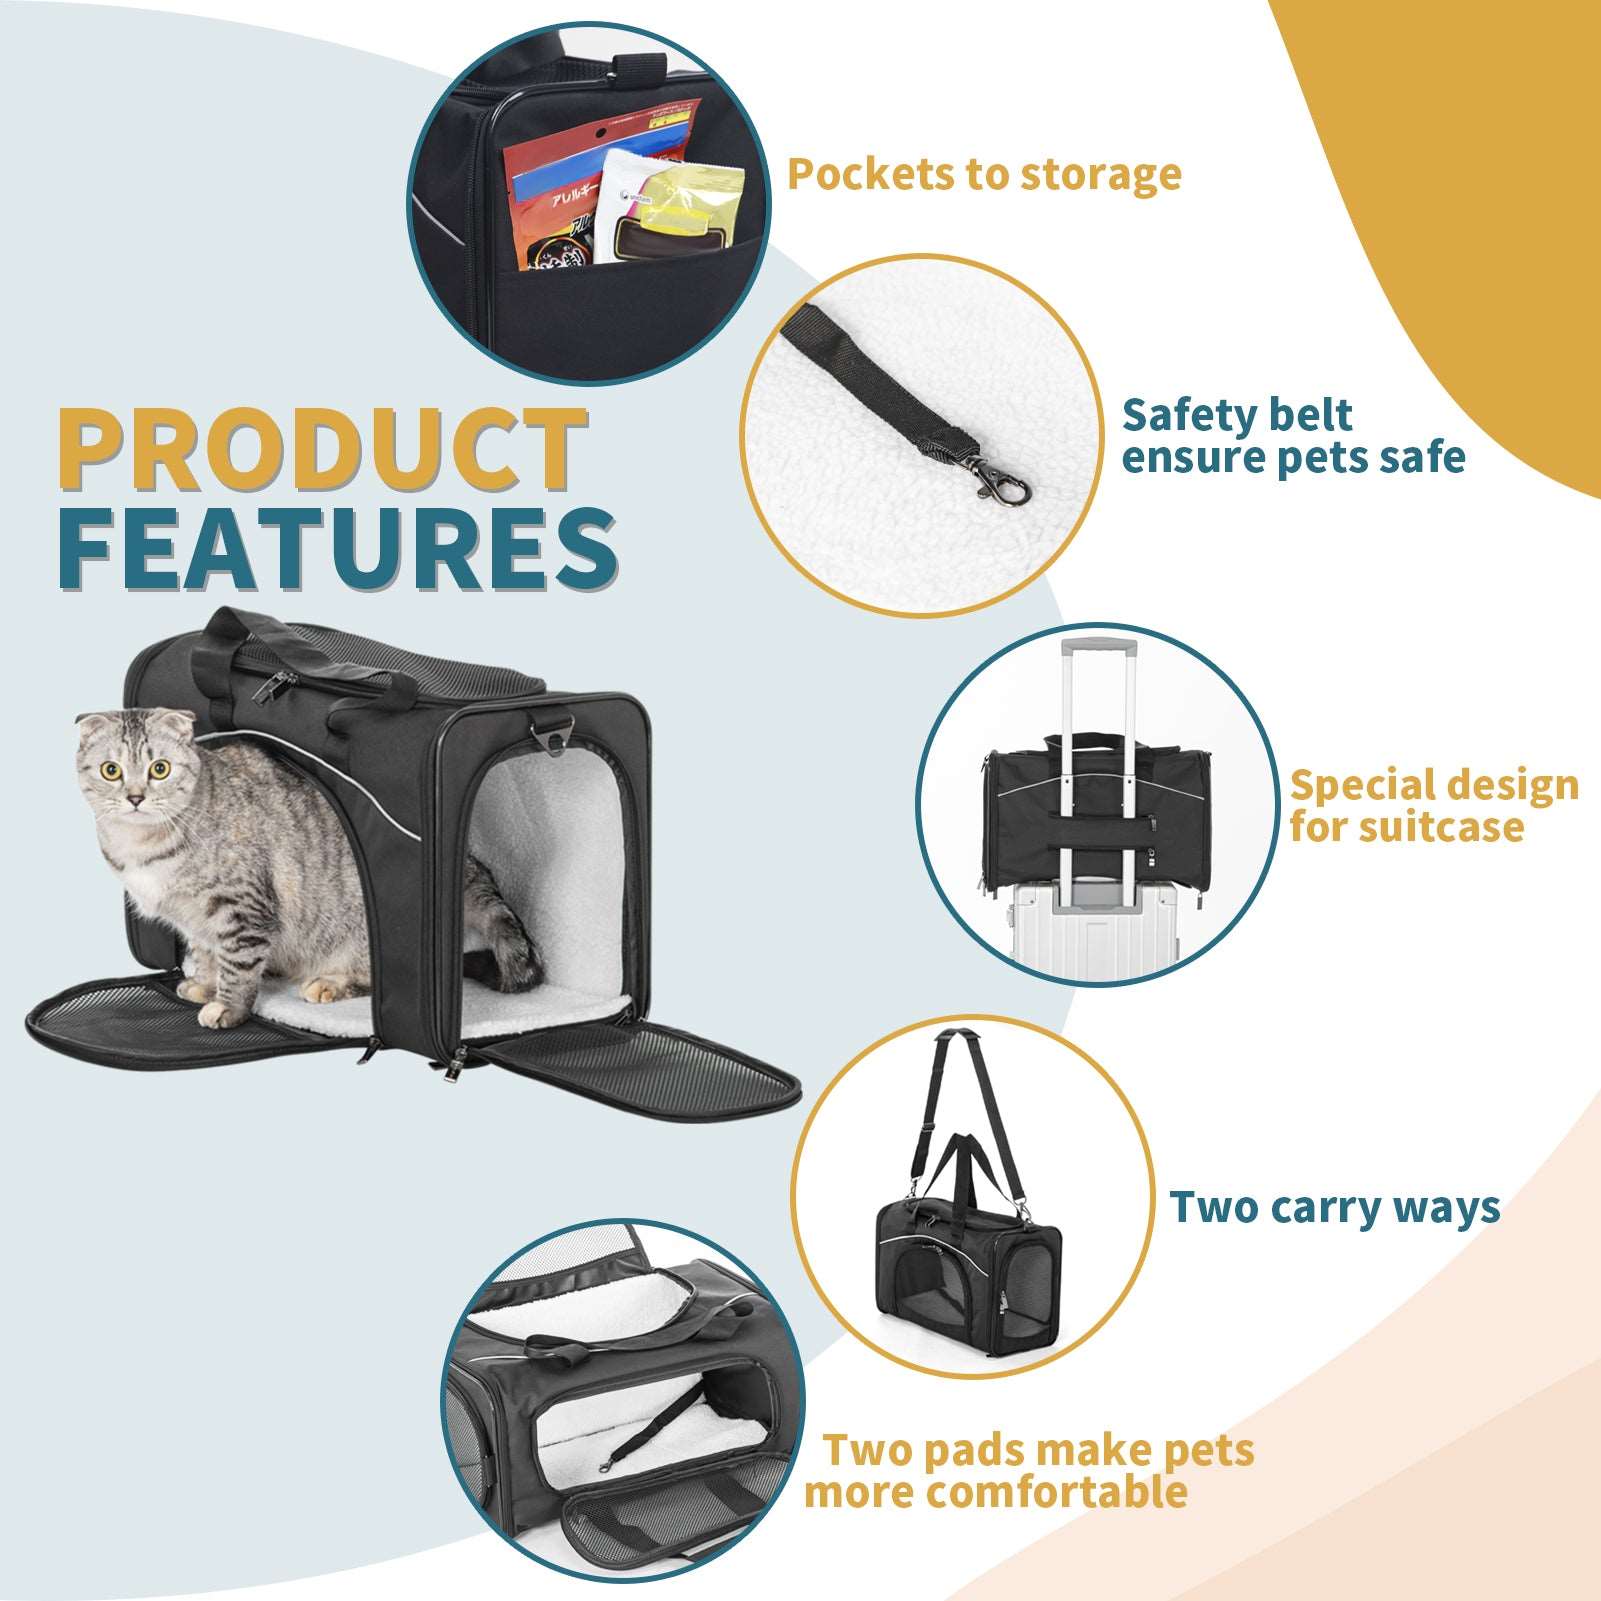 Petsfit-Pet-Carrier-Airline-Approved-04